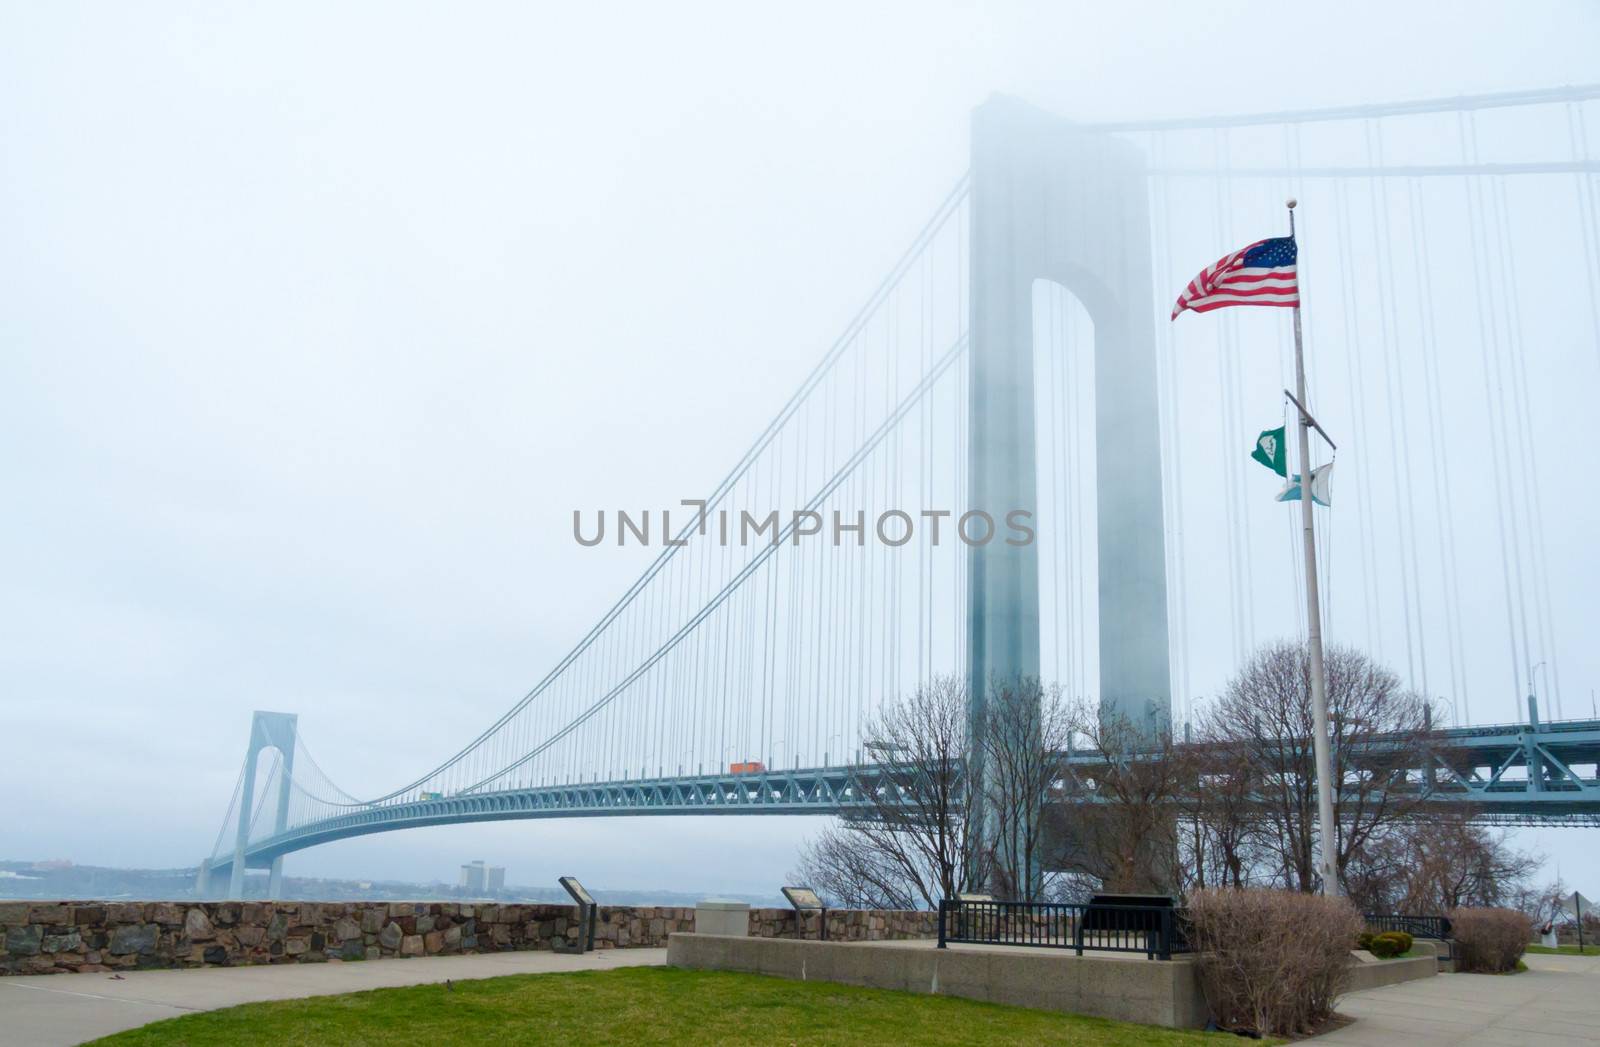 view of the Verrazano-Narrows Bridge and Fort Wadsworth